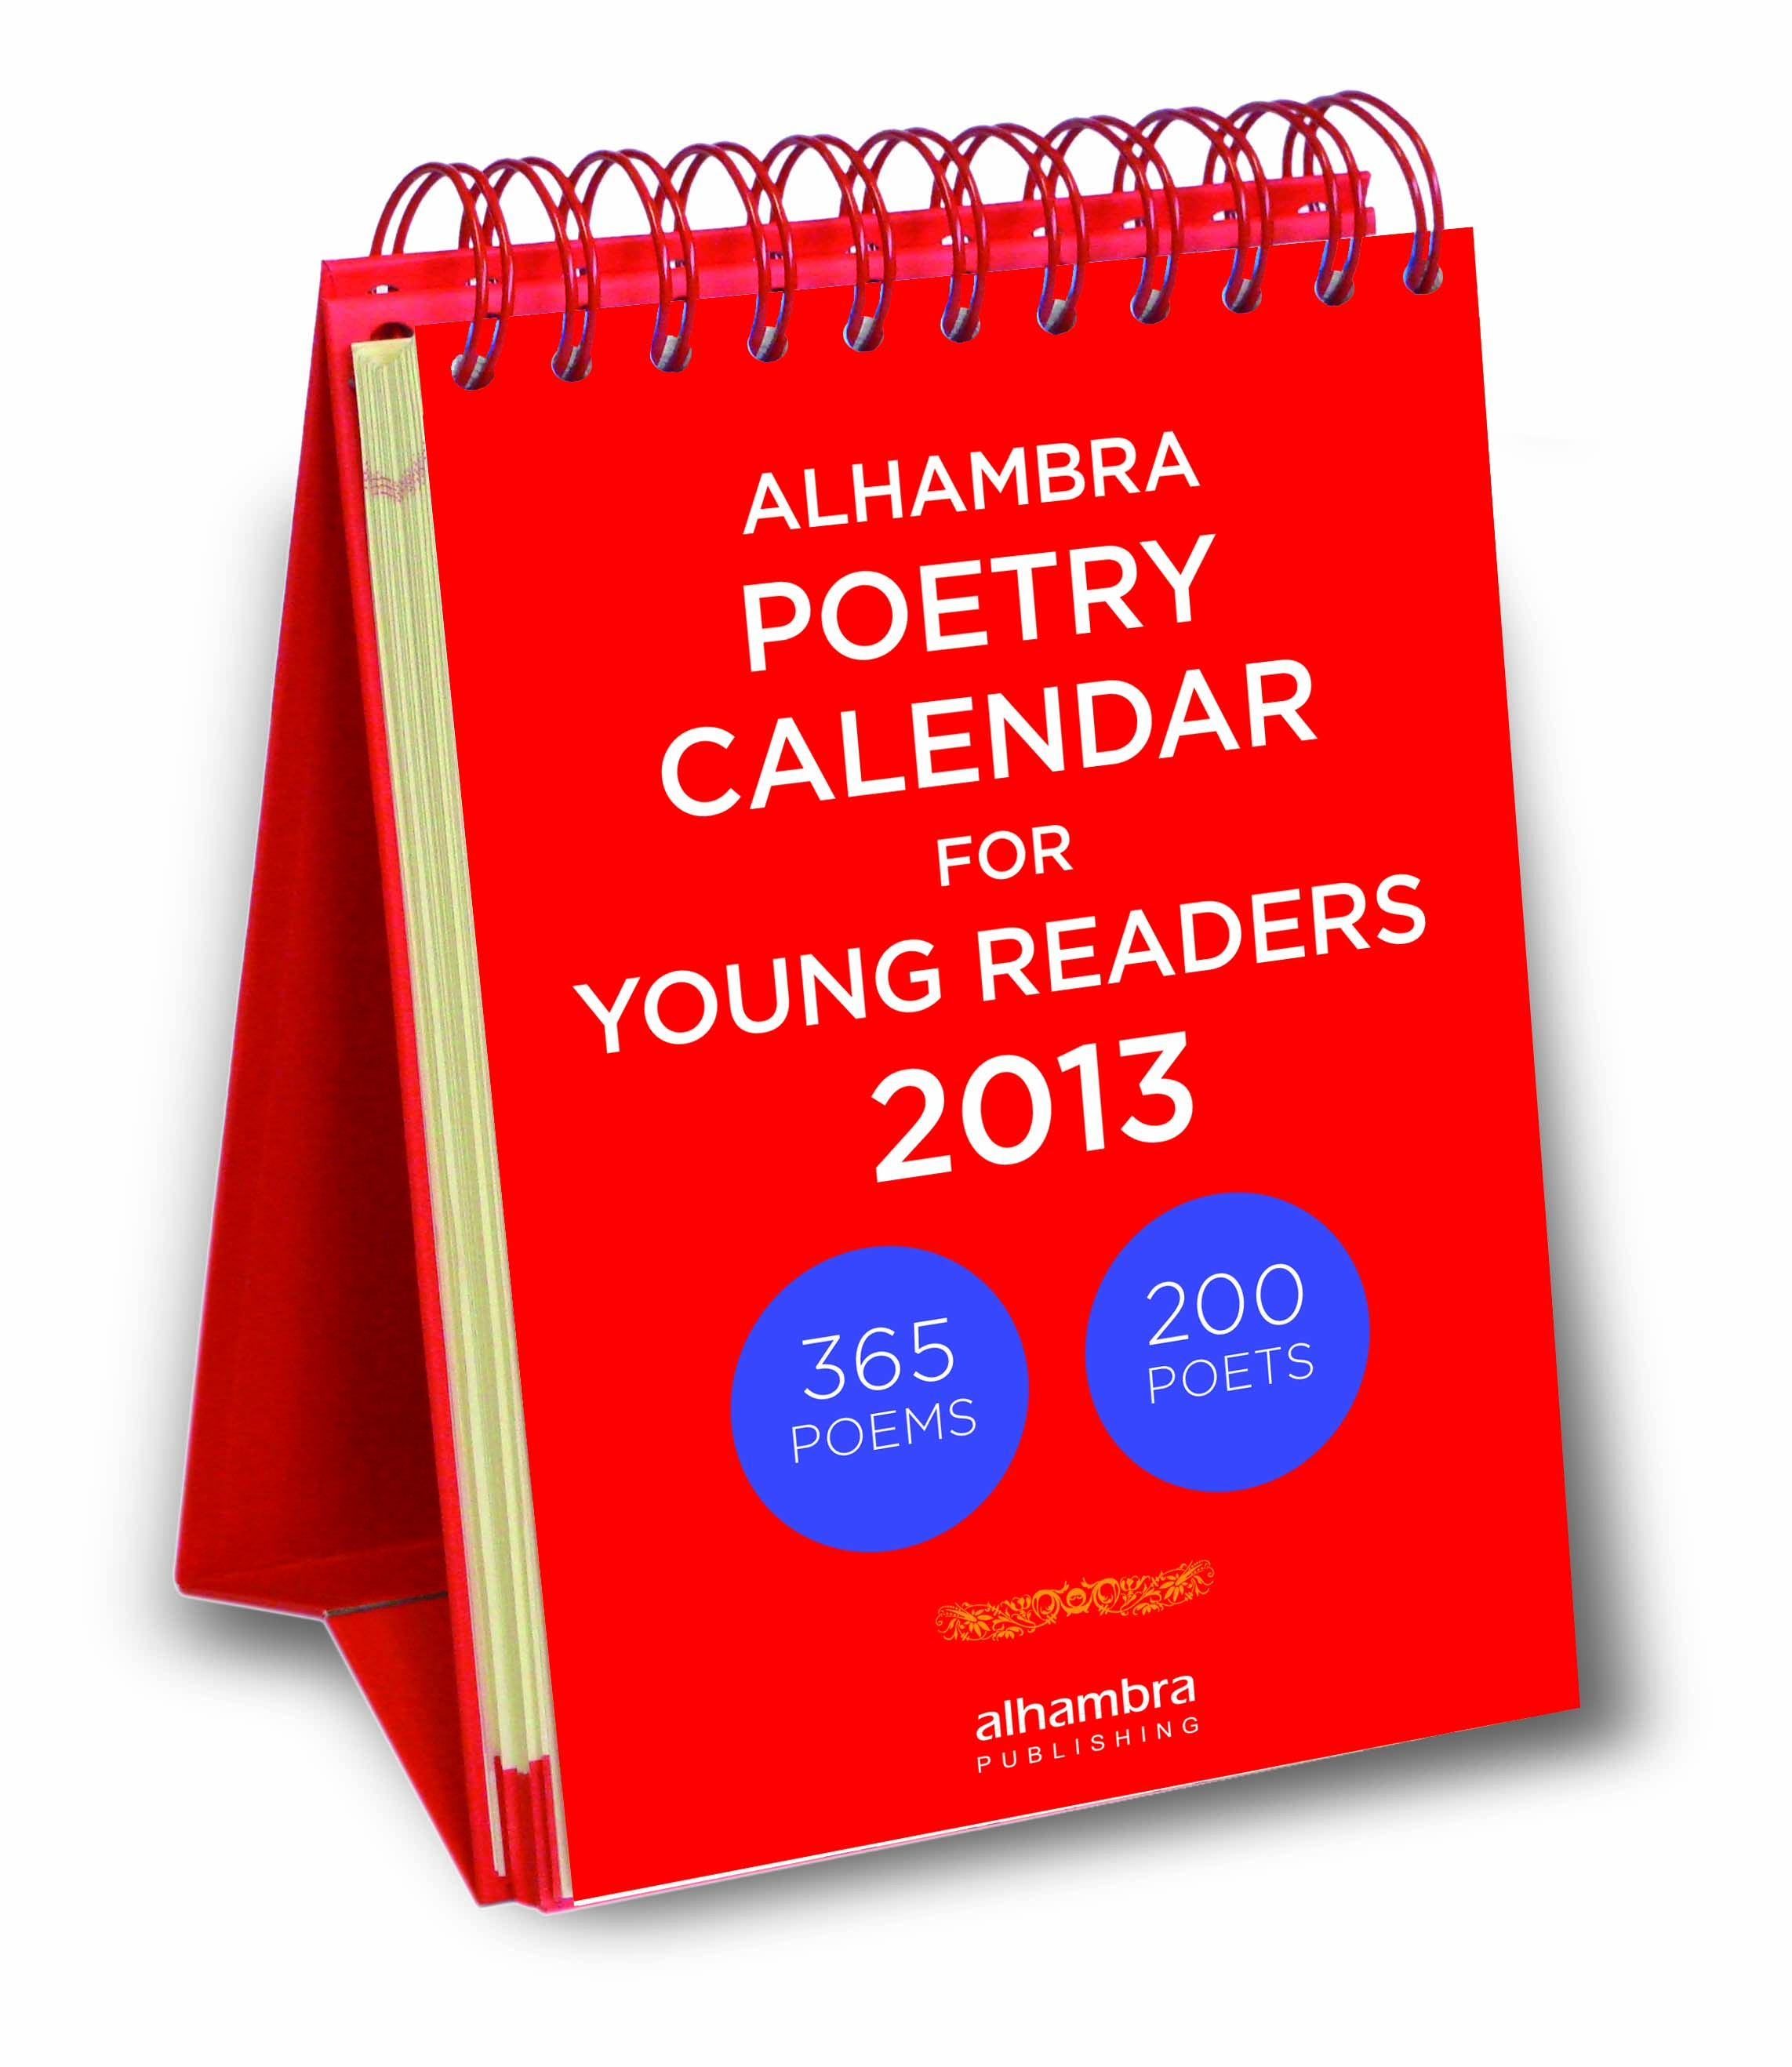 junge LeserAlhambra Poetry Calendar for Young Readers 2013